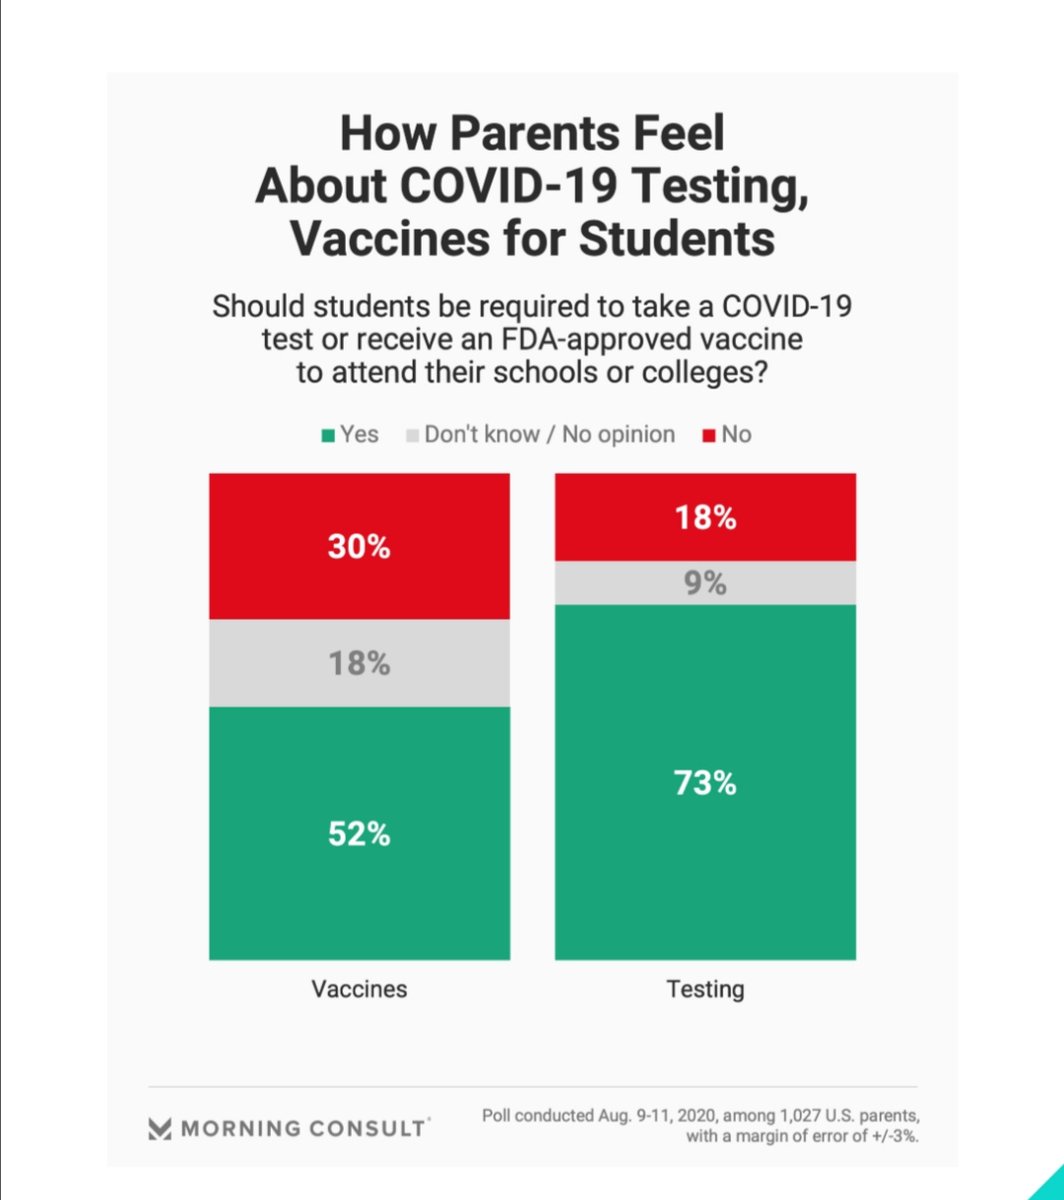 Over Half of Parents Polled Say Students Should be Required to Receive a COVID-19 Vaccine Once Approved : https://morningconsult.com/2020/08/12/covid-testing-vaccine-schools-workplaces-poll/